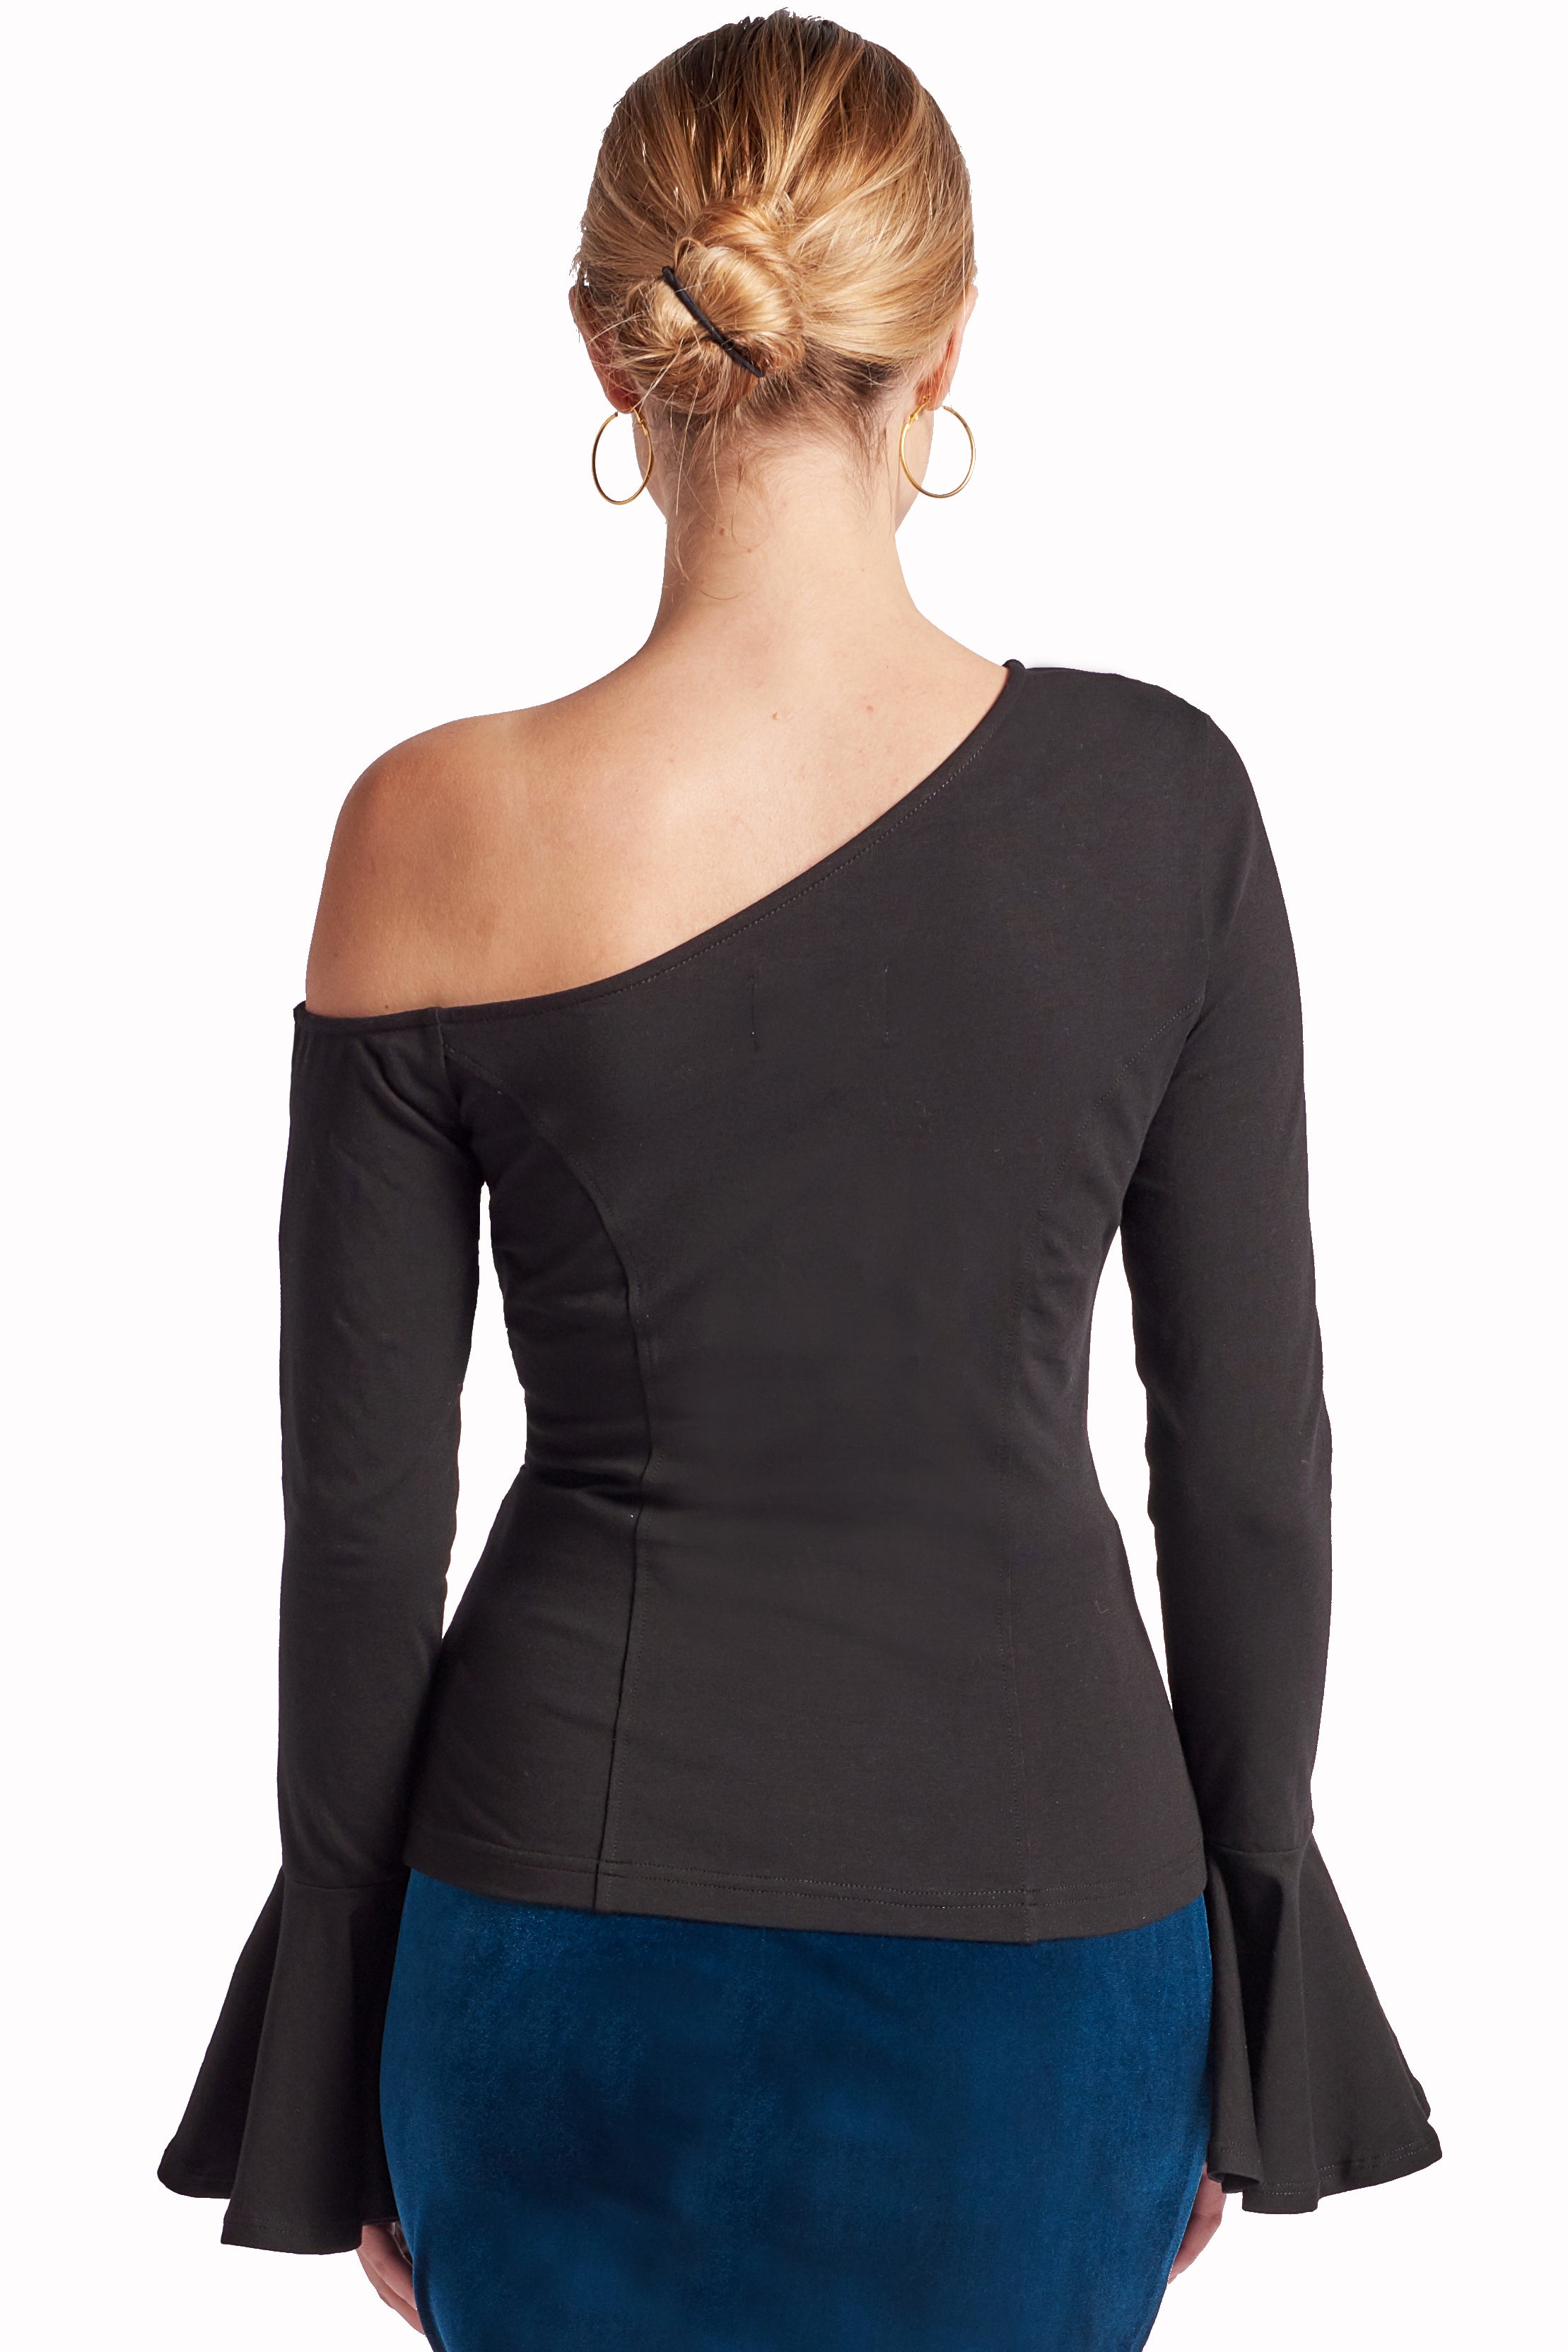 Back view of model wearing long sleeve knit black, one shoulder cut-out asymmetric bell sleeve top.